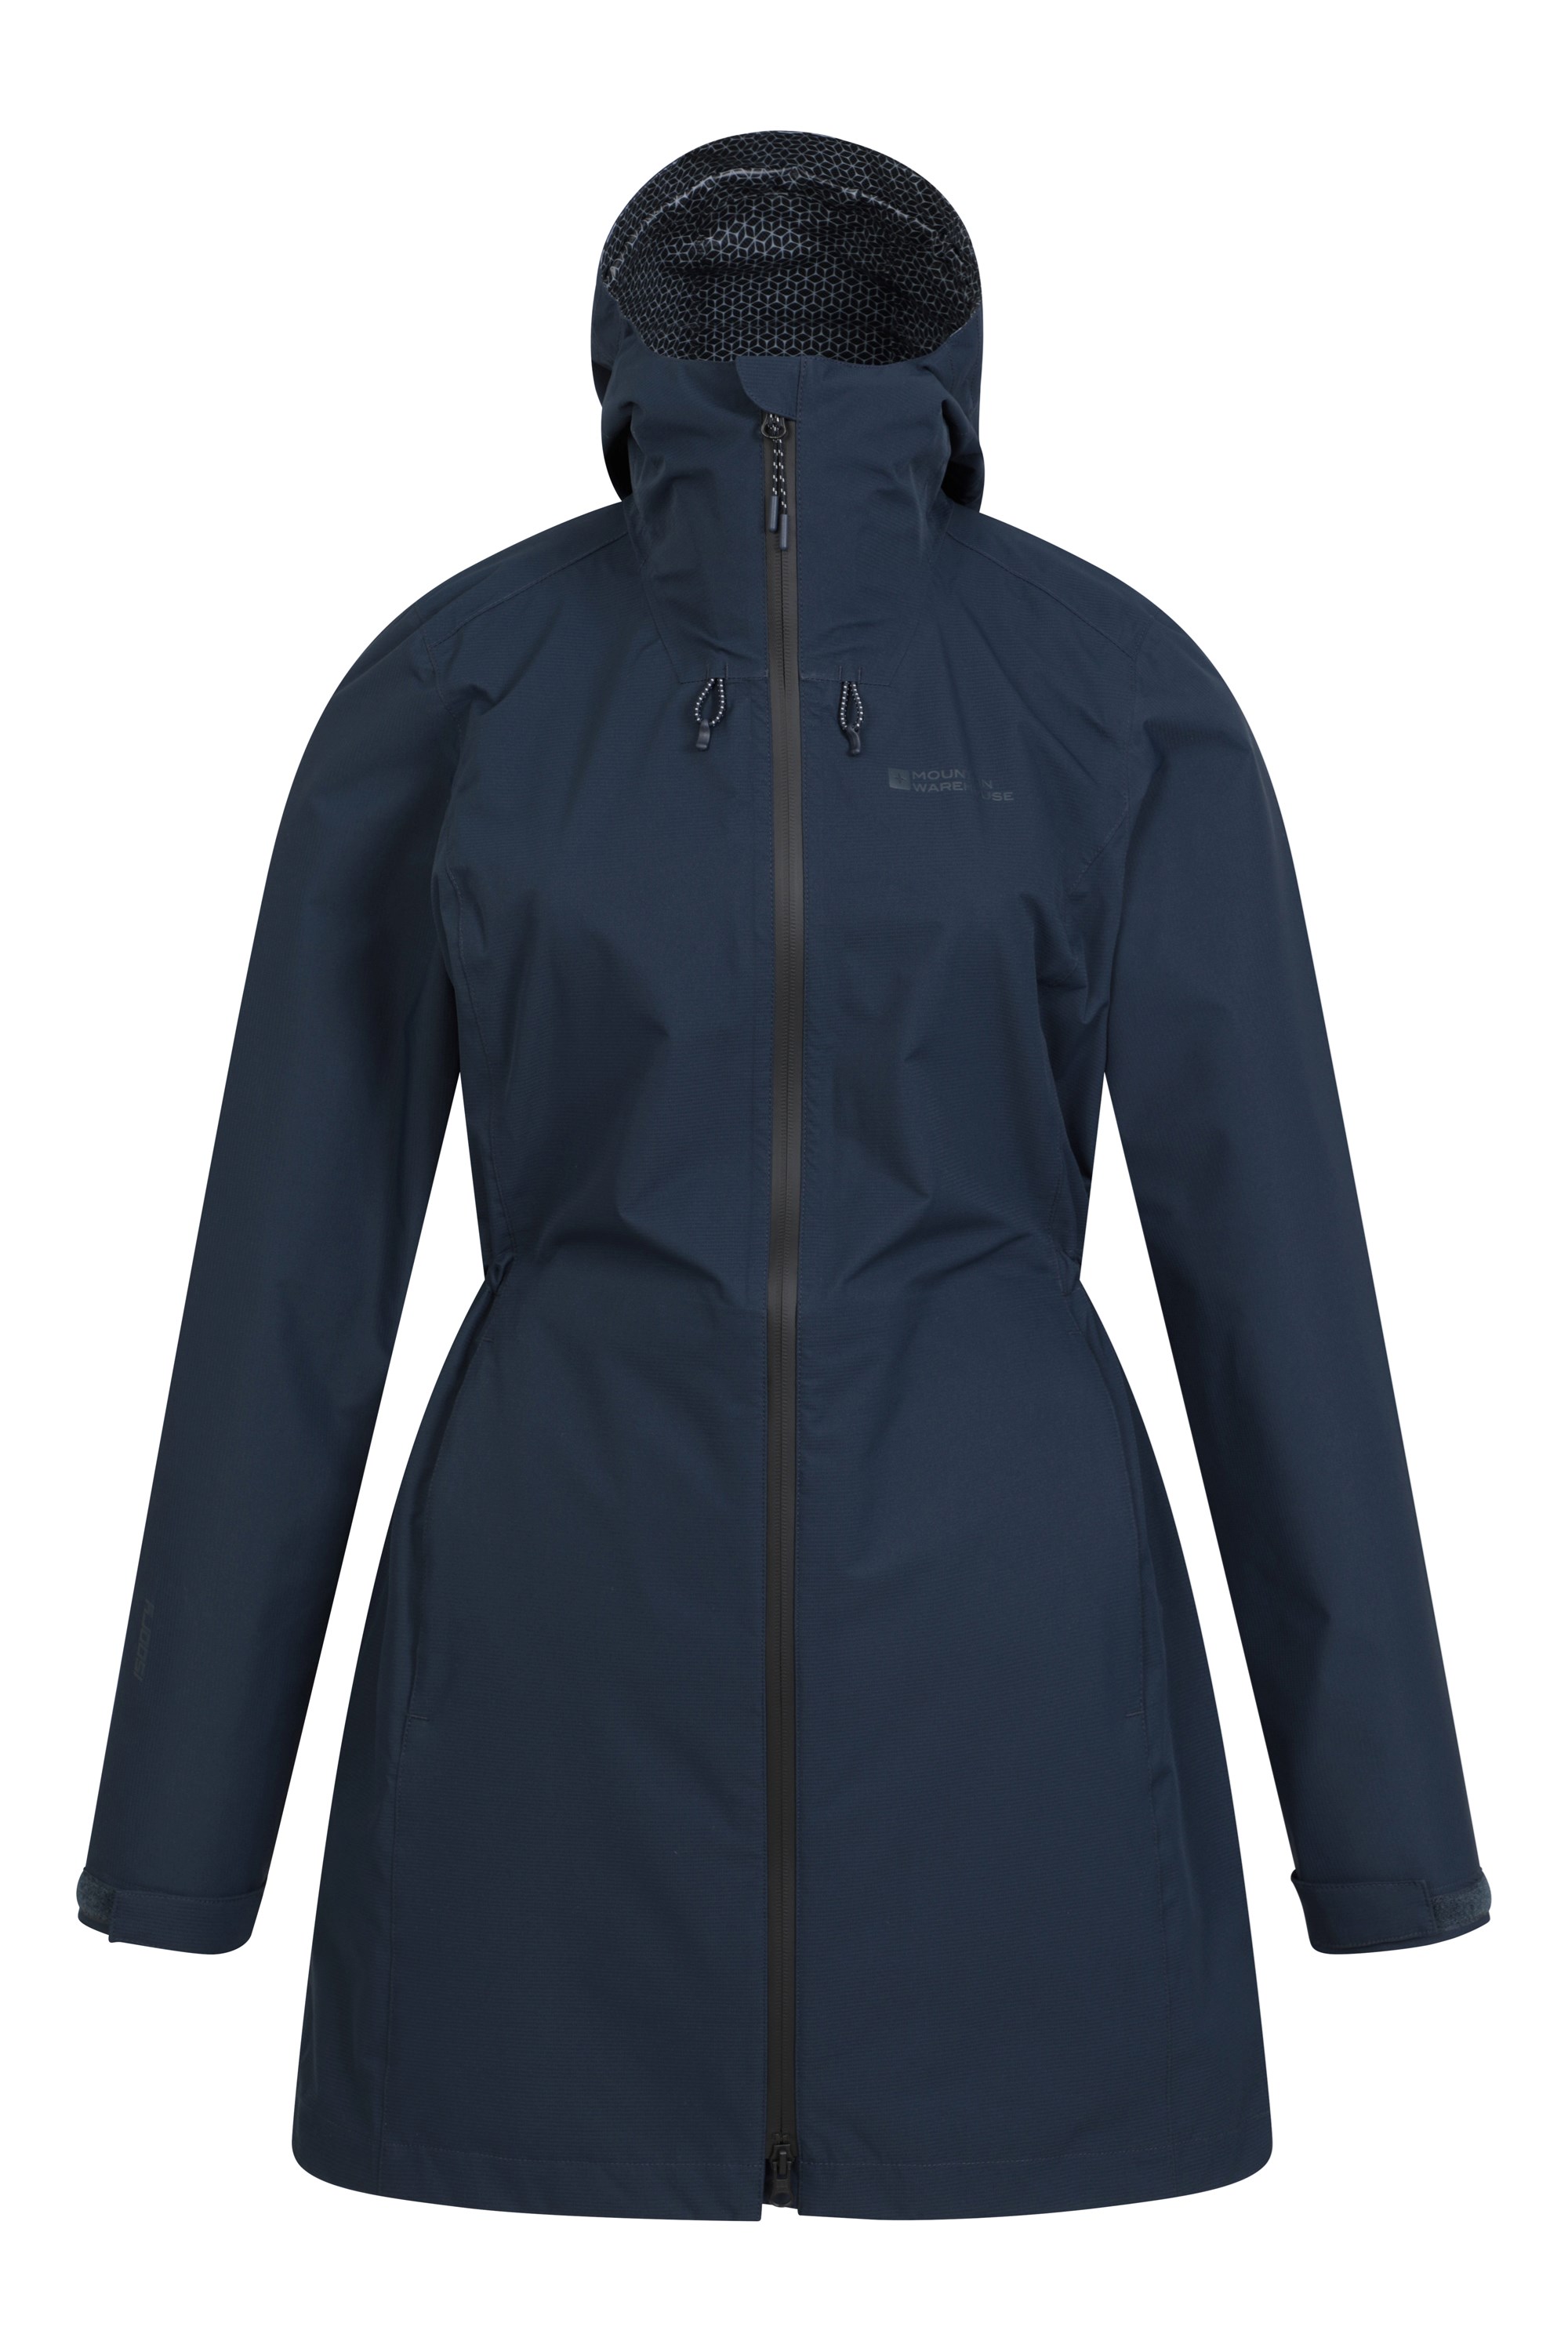 Solstice Extreme Womens 2.5 Layer Waterproof Jacket